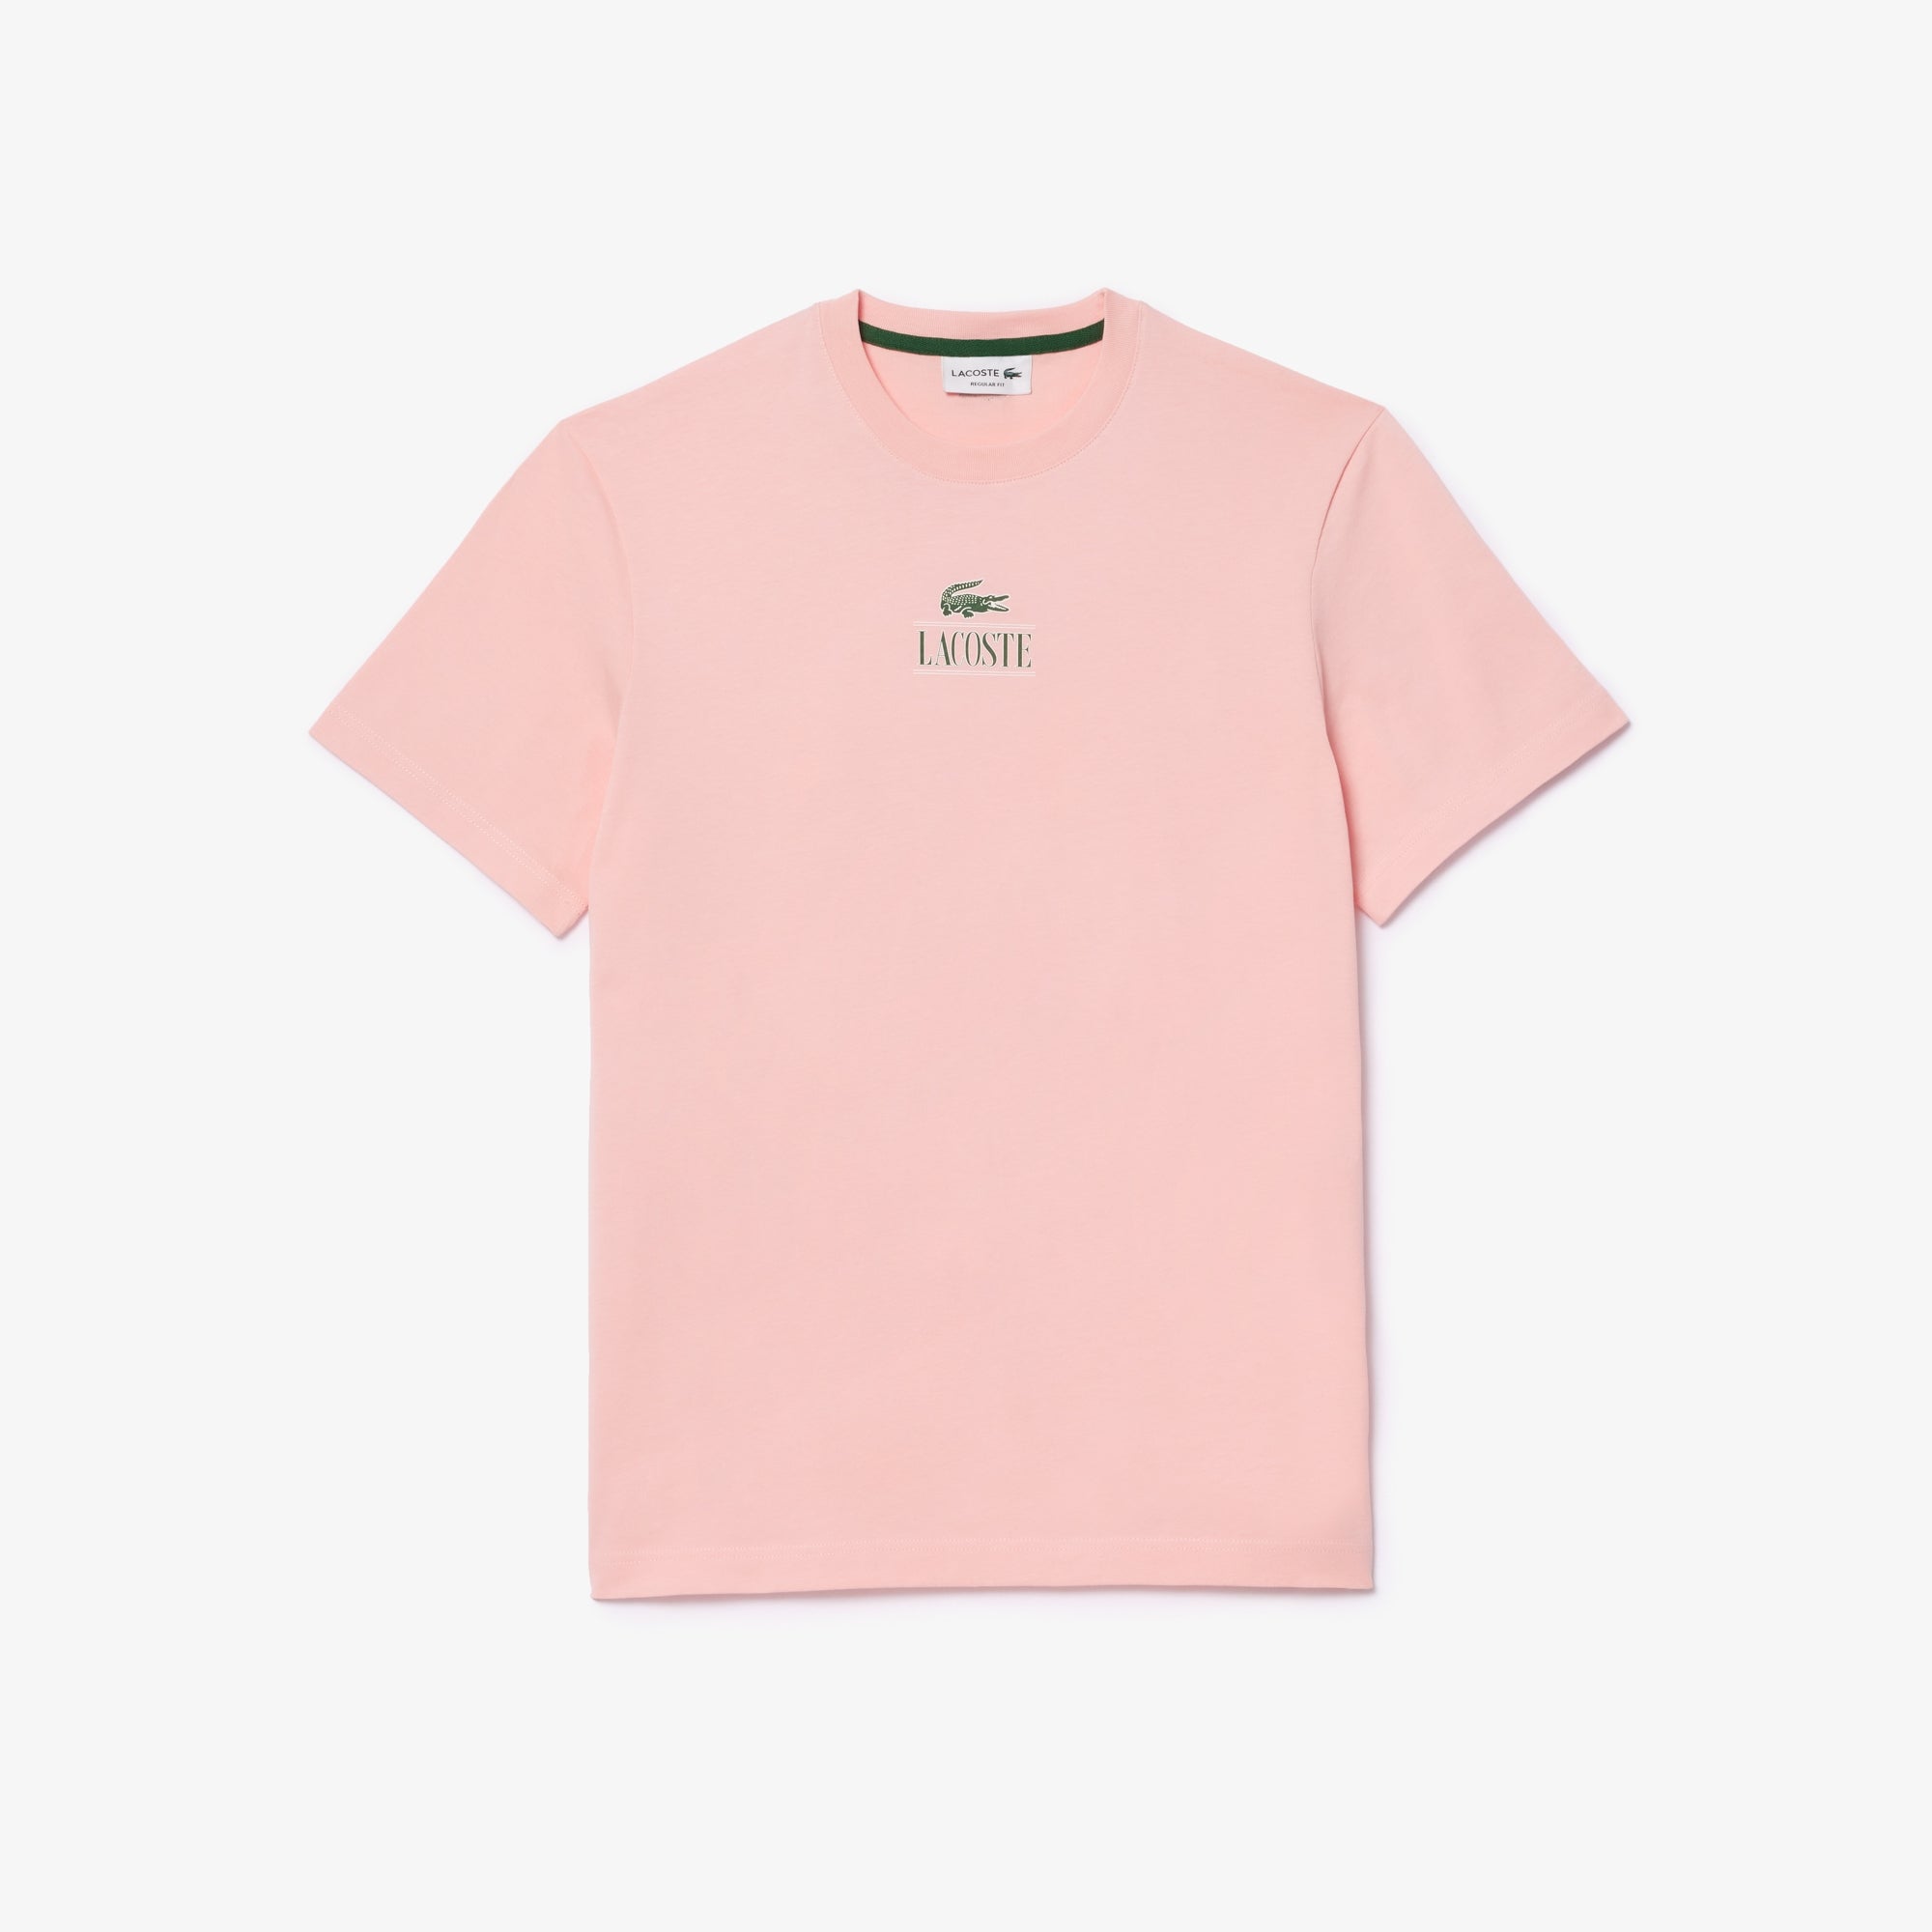 Lacoste Unisex Regular Fit Cotton Jersey Branded T-Shirt Waterlily Pink TH1147 KF9